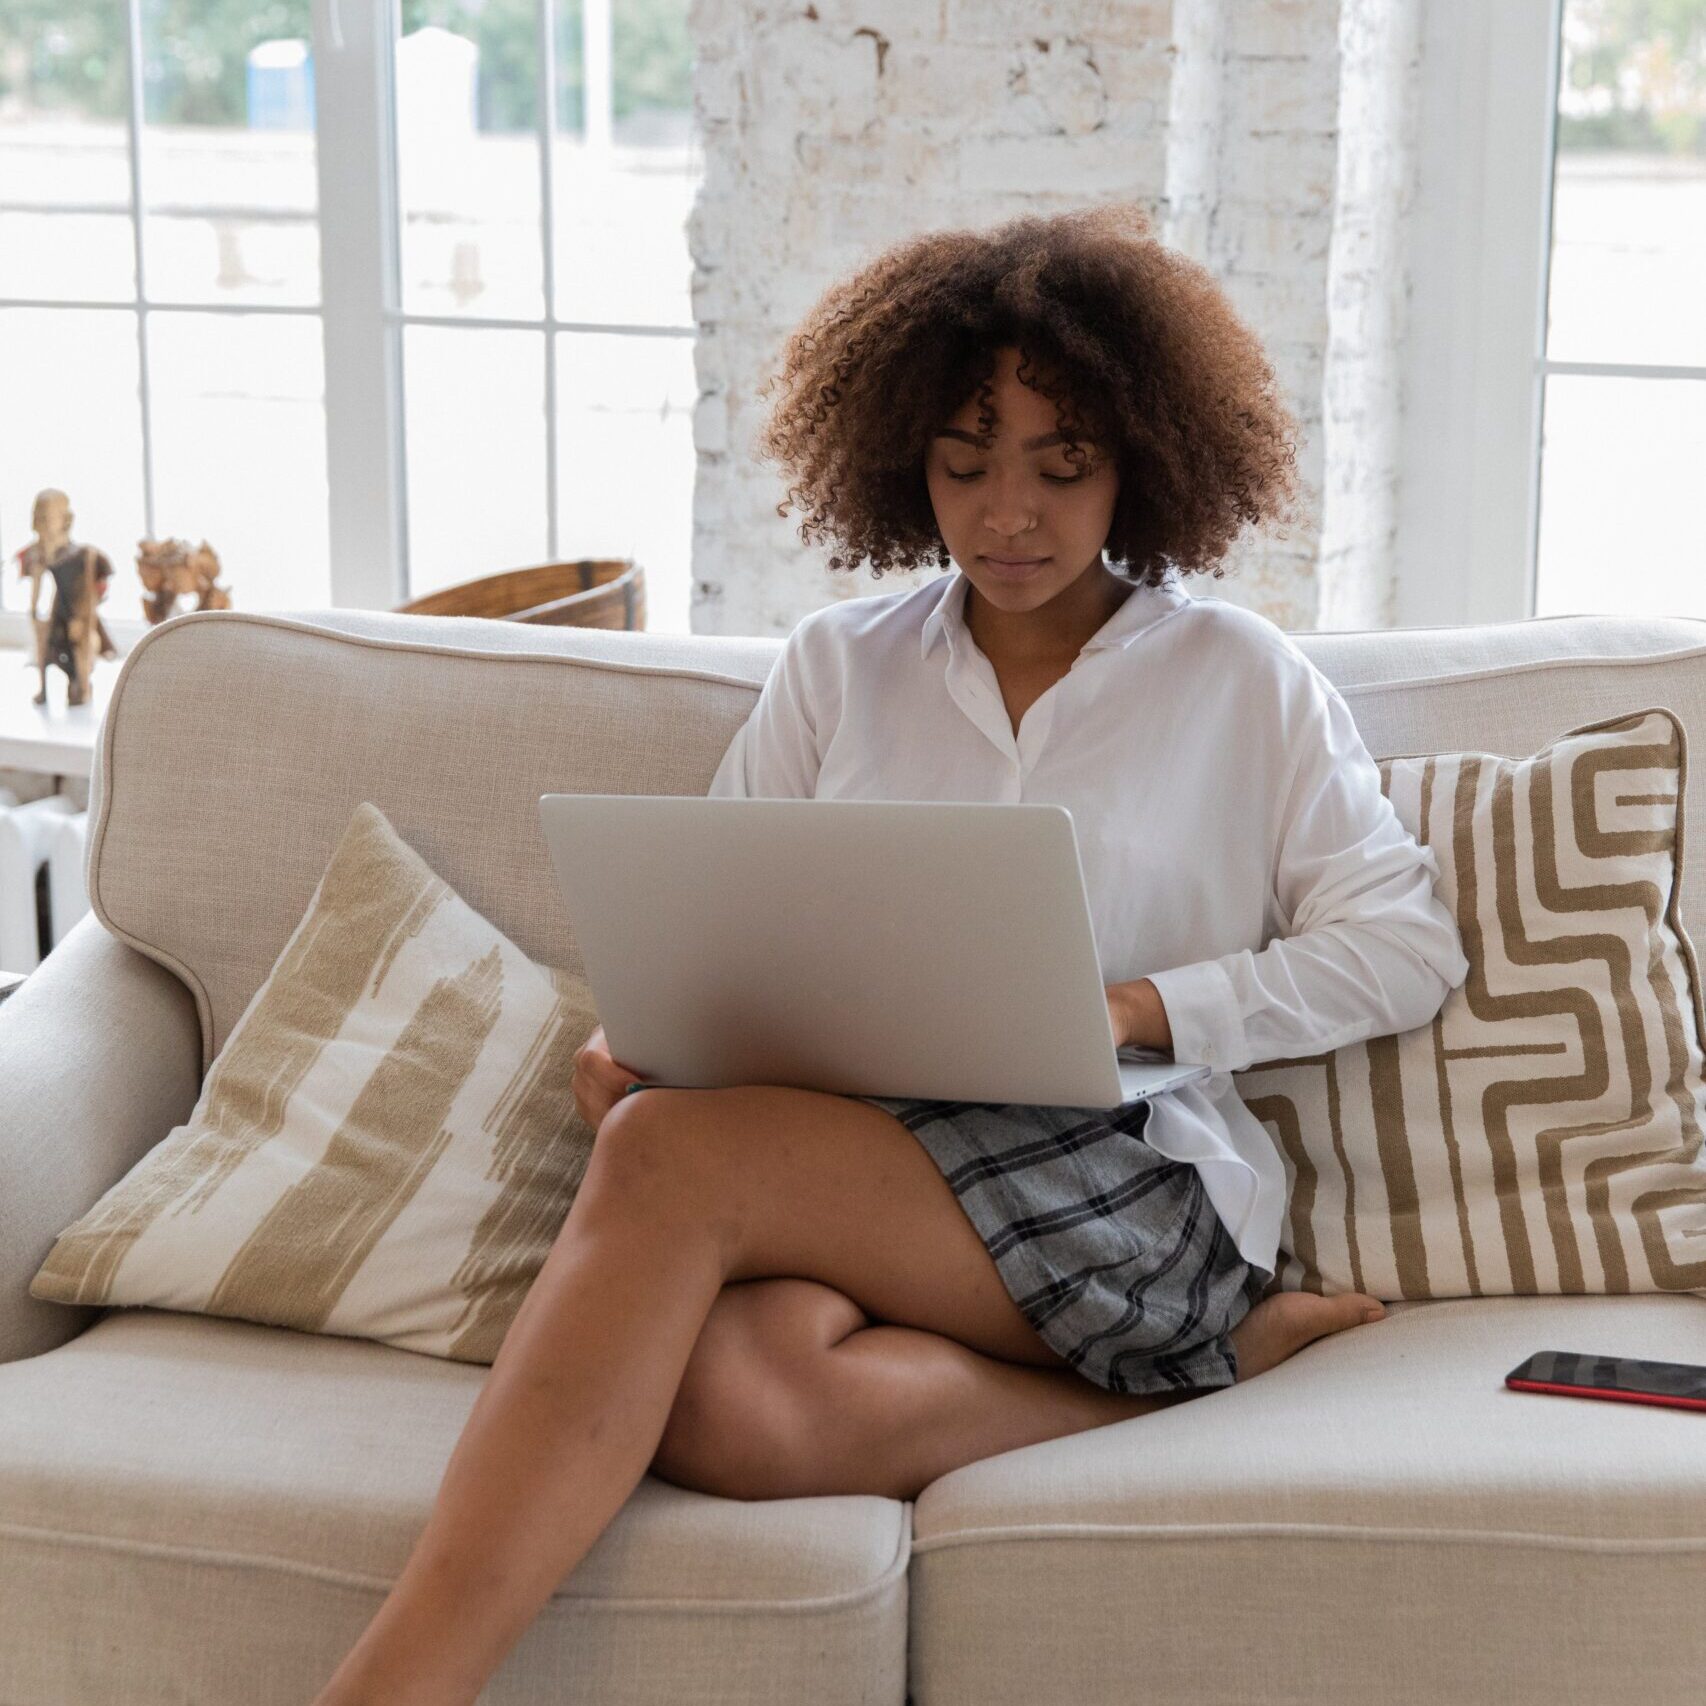 Black woman with brown curly hair in a white blouse and blue/white striped shorts sitting crossed legged on a cream couch using her laptop